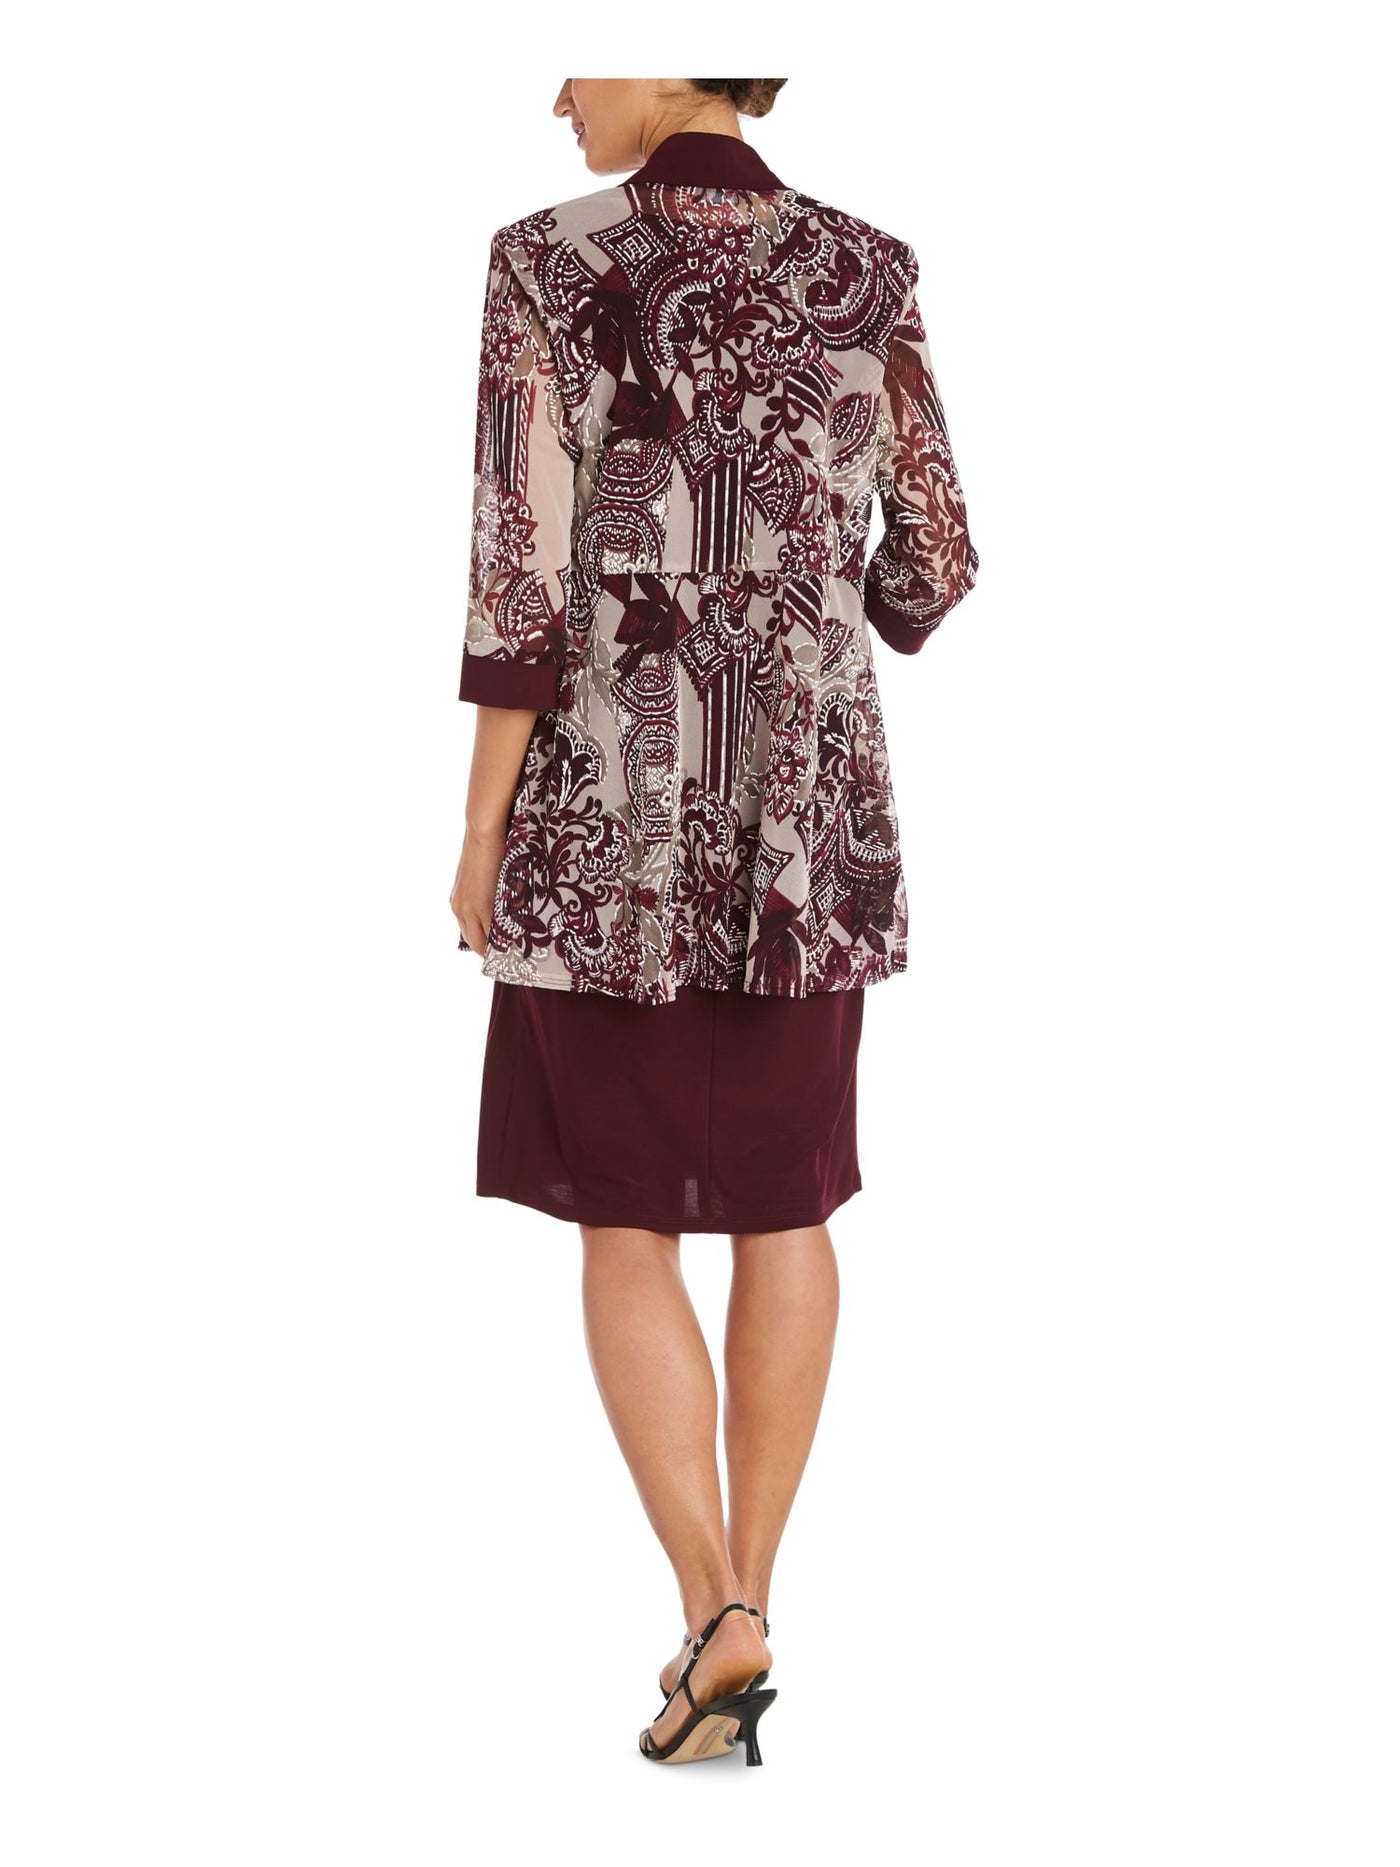 R&M RICHARDS Womens Burgundy Open Front 3/4 Sleeves Floral Wear To Work Duster Jacket Plus 18W